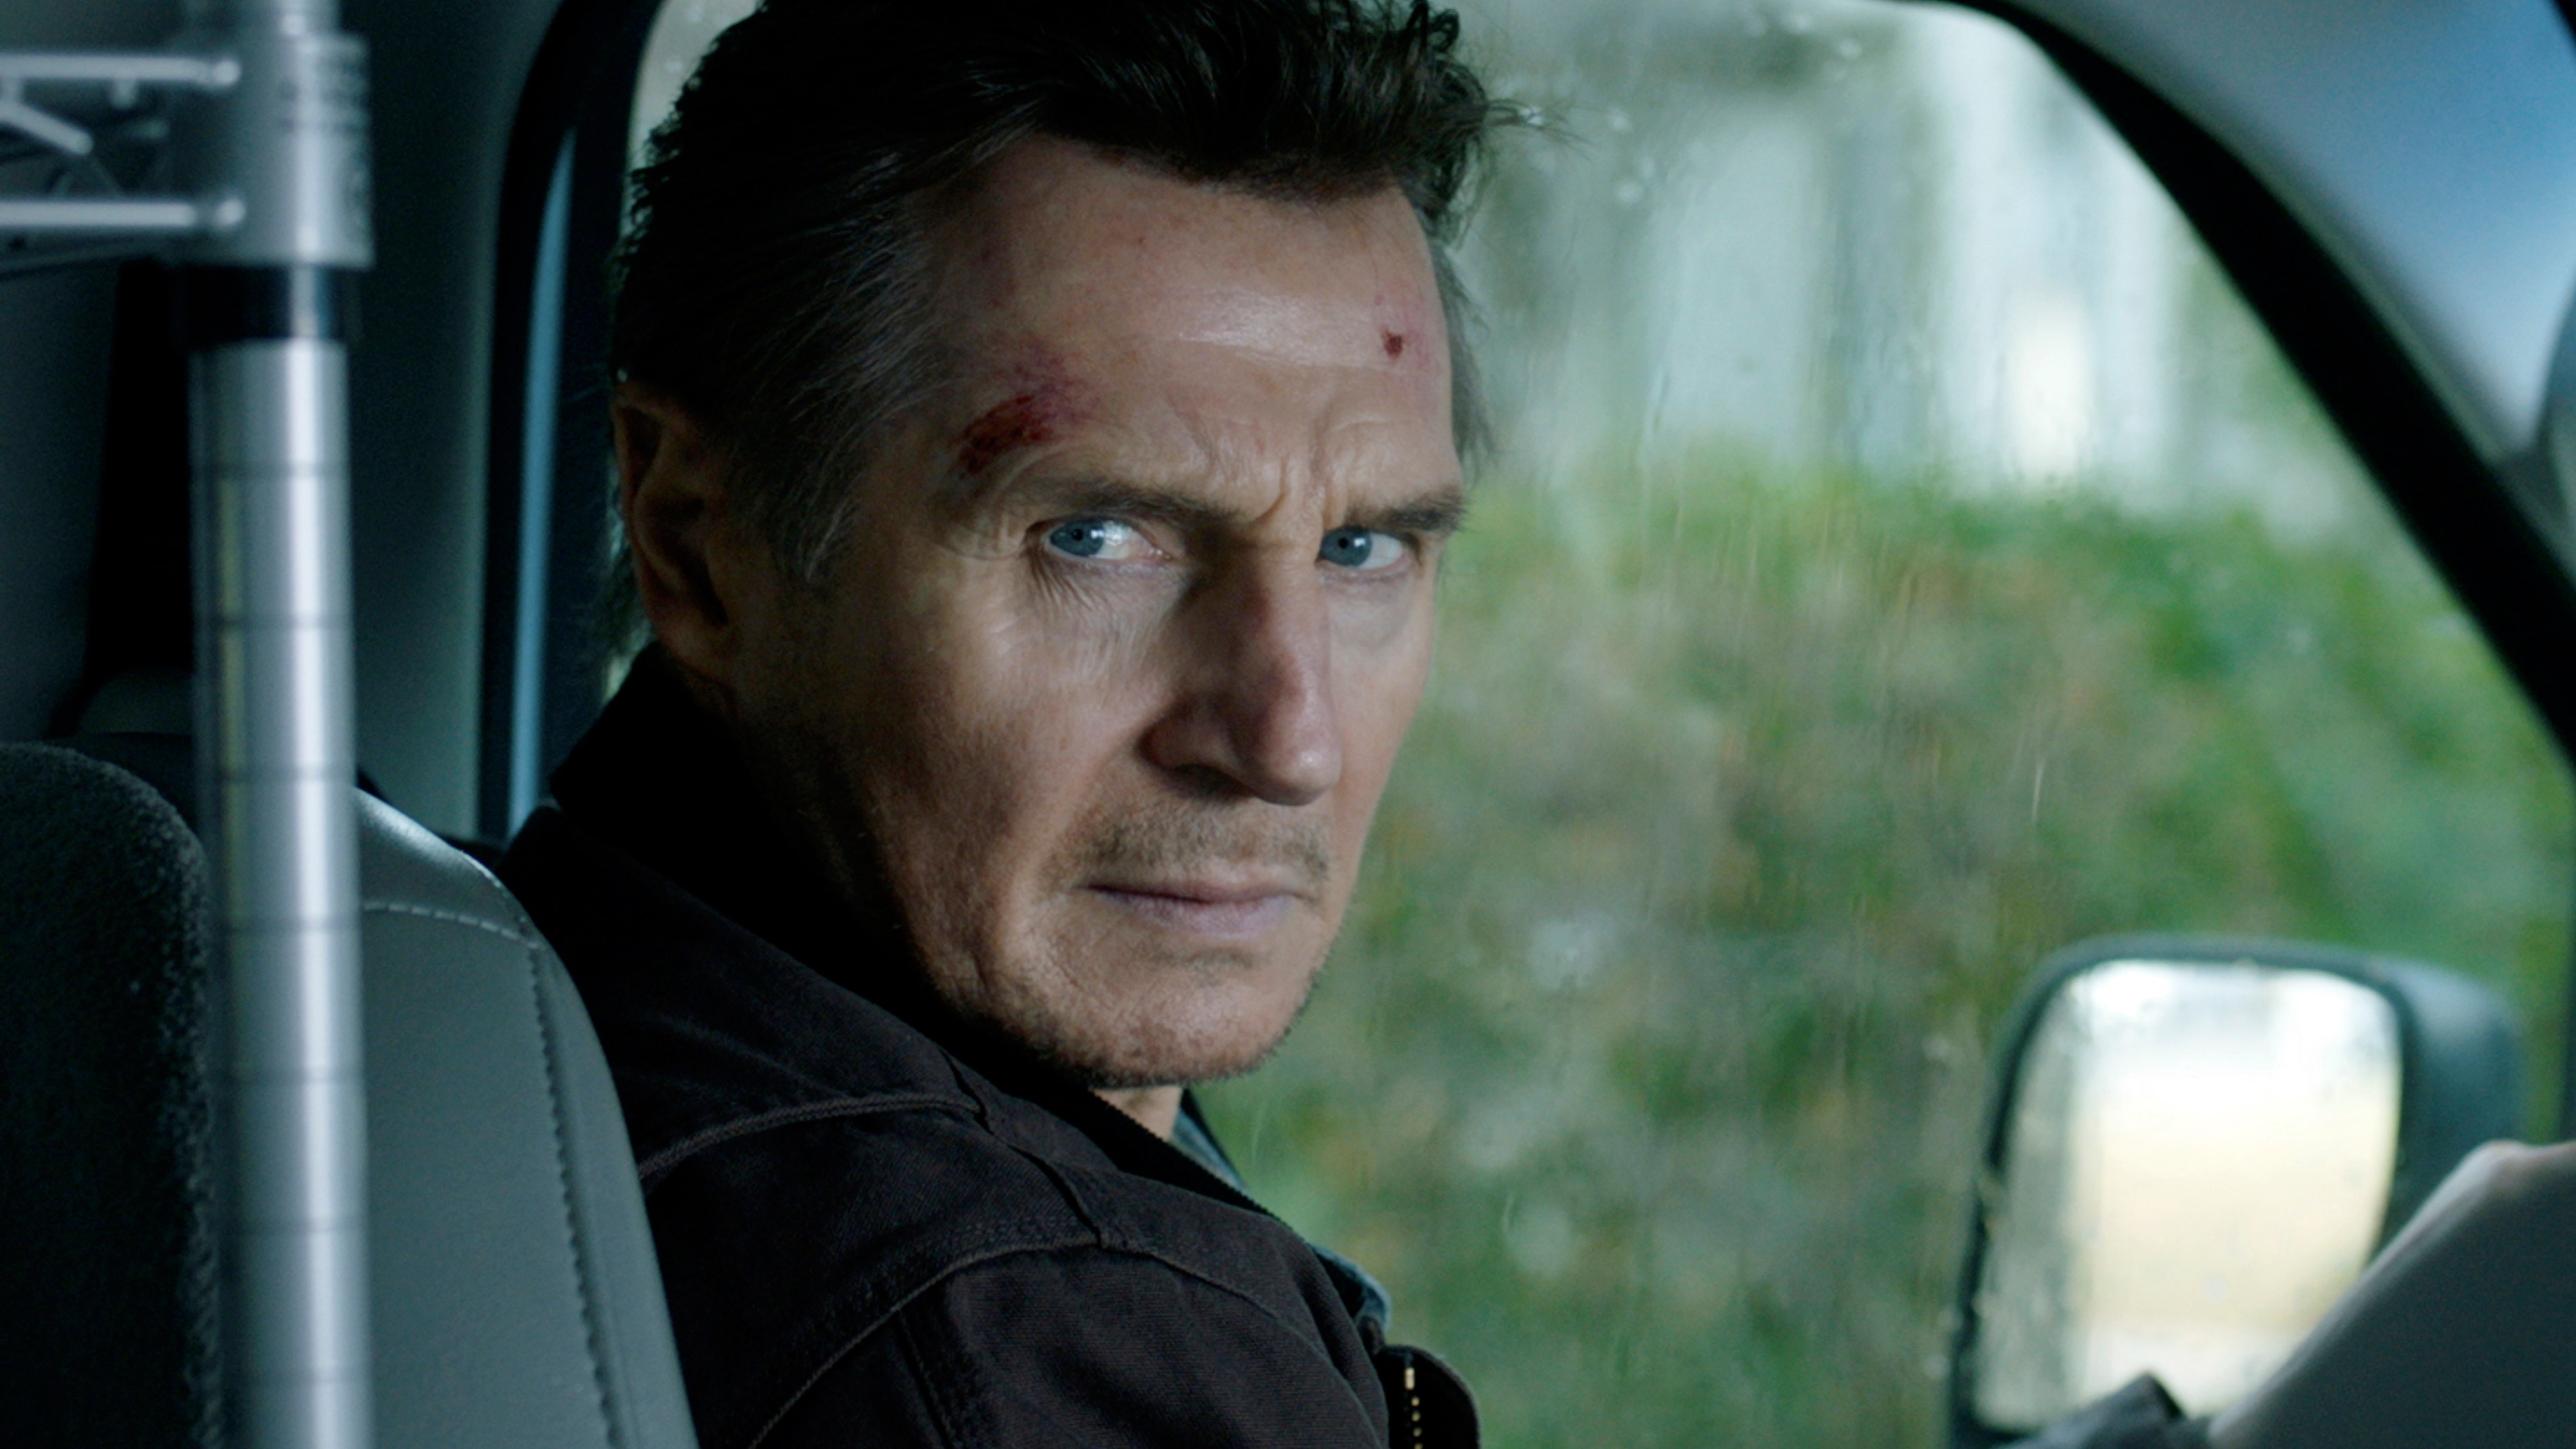 Liam Neeson says he plans to retire from action movies soon